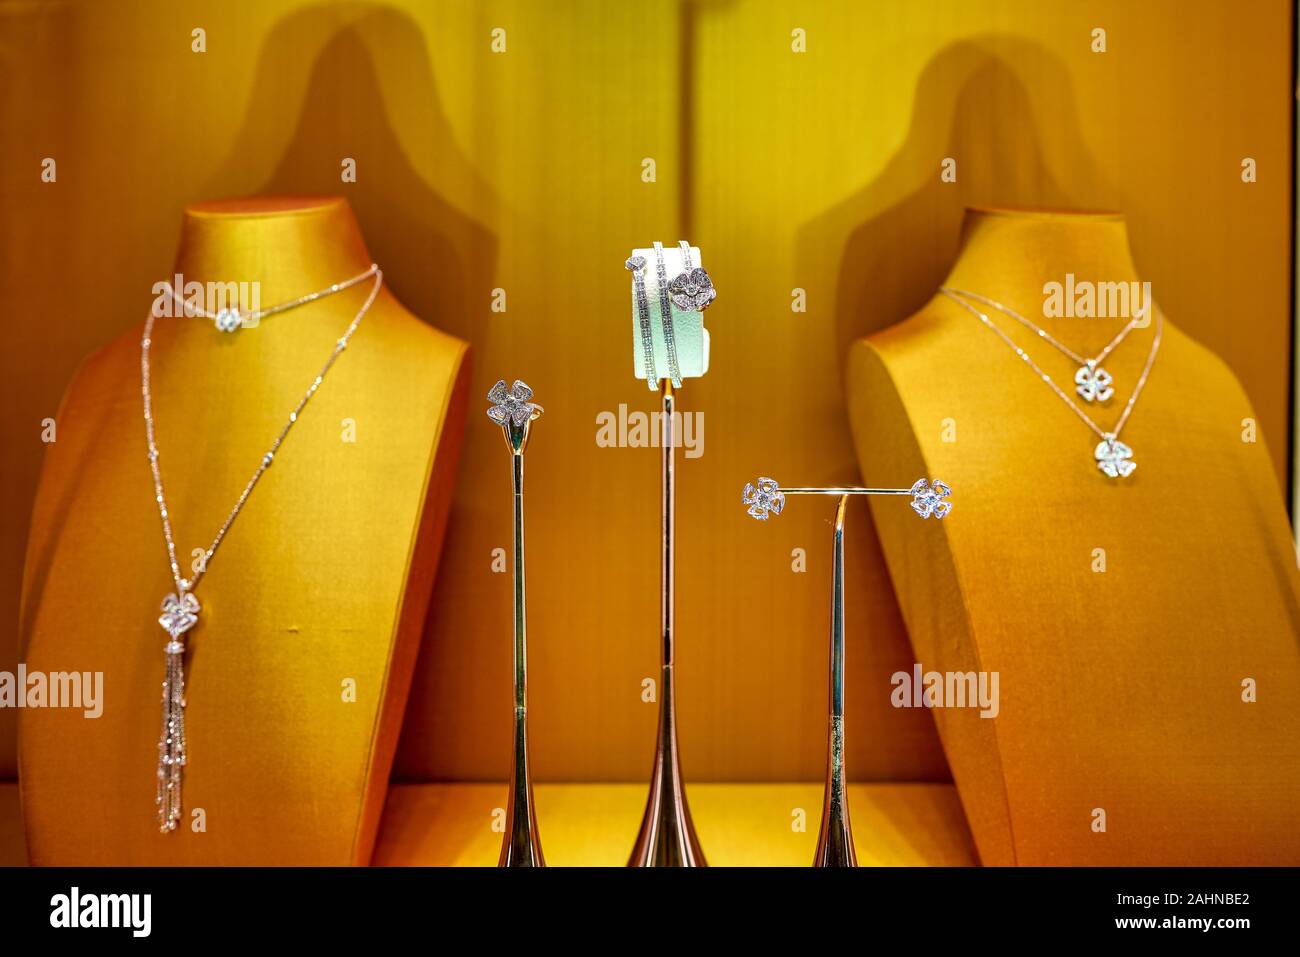 SINGAPORE - CIRCA APRIL, 2019: Bvlgari accessories on display at a store in the Shoppes at Marina Bay Sands. Stock Photo